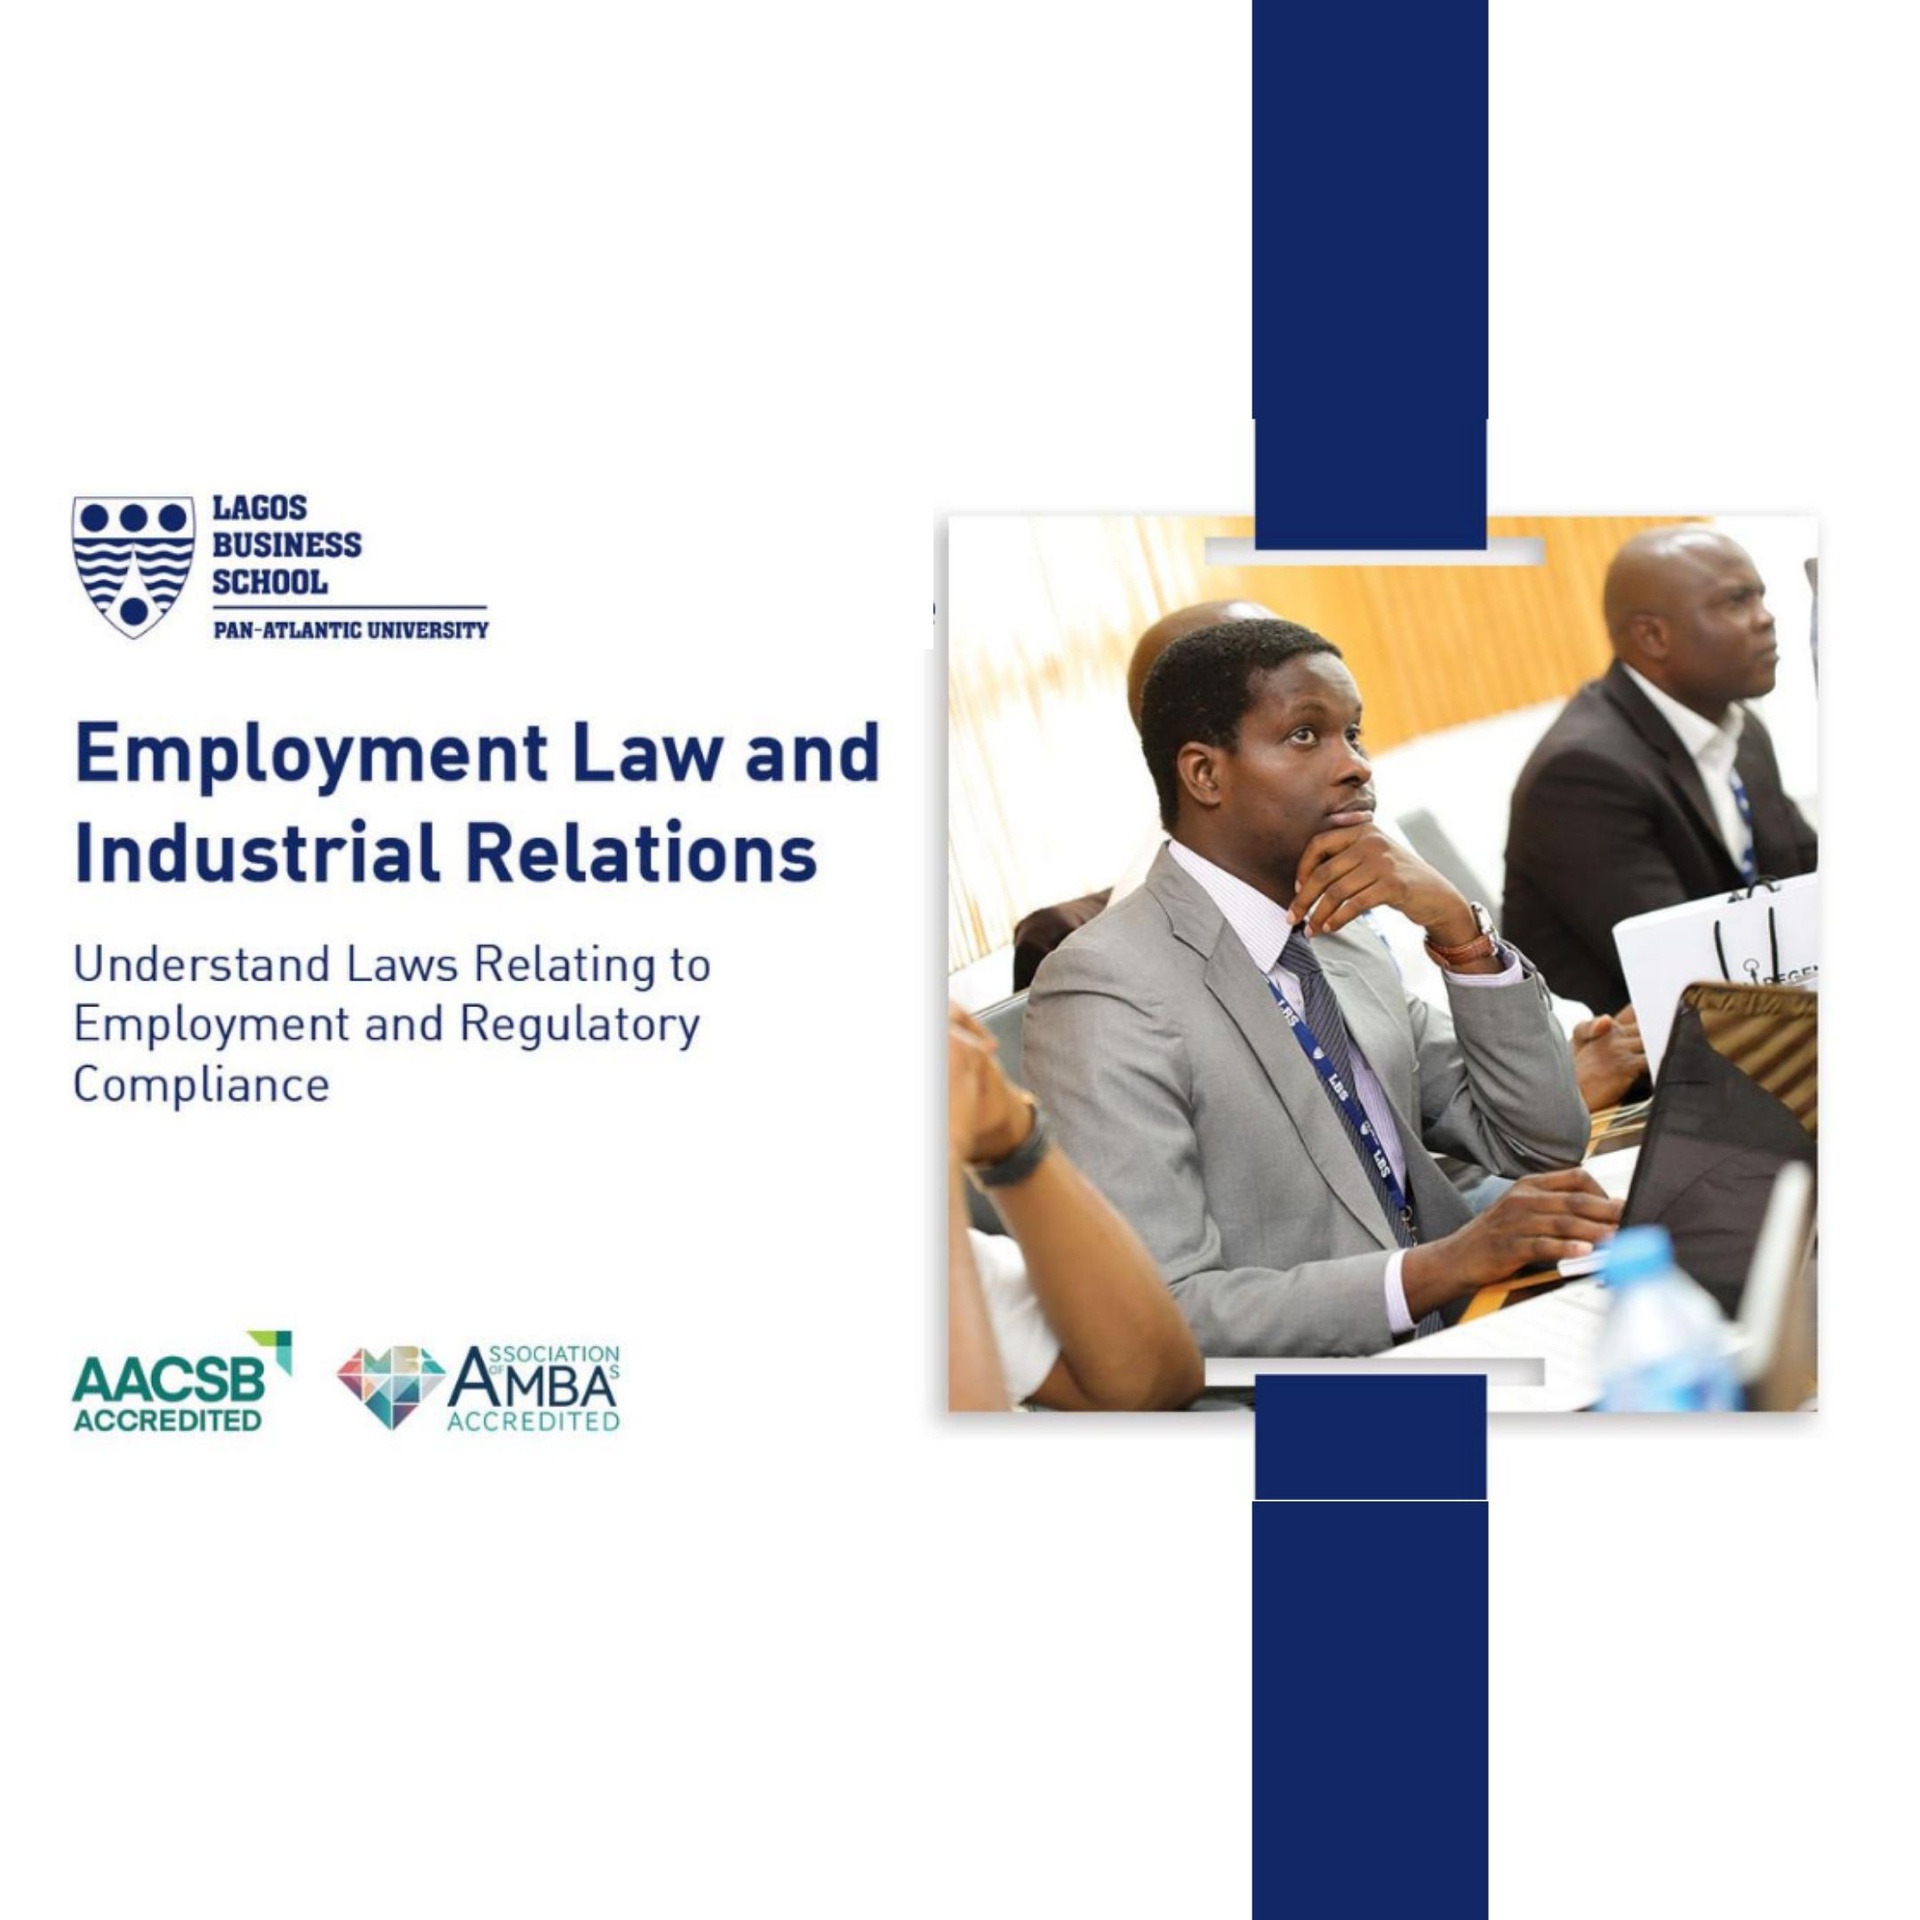 Employment Law and Industrial Relations